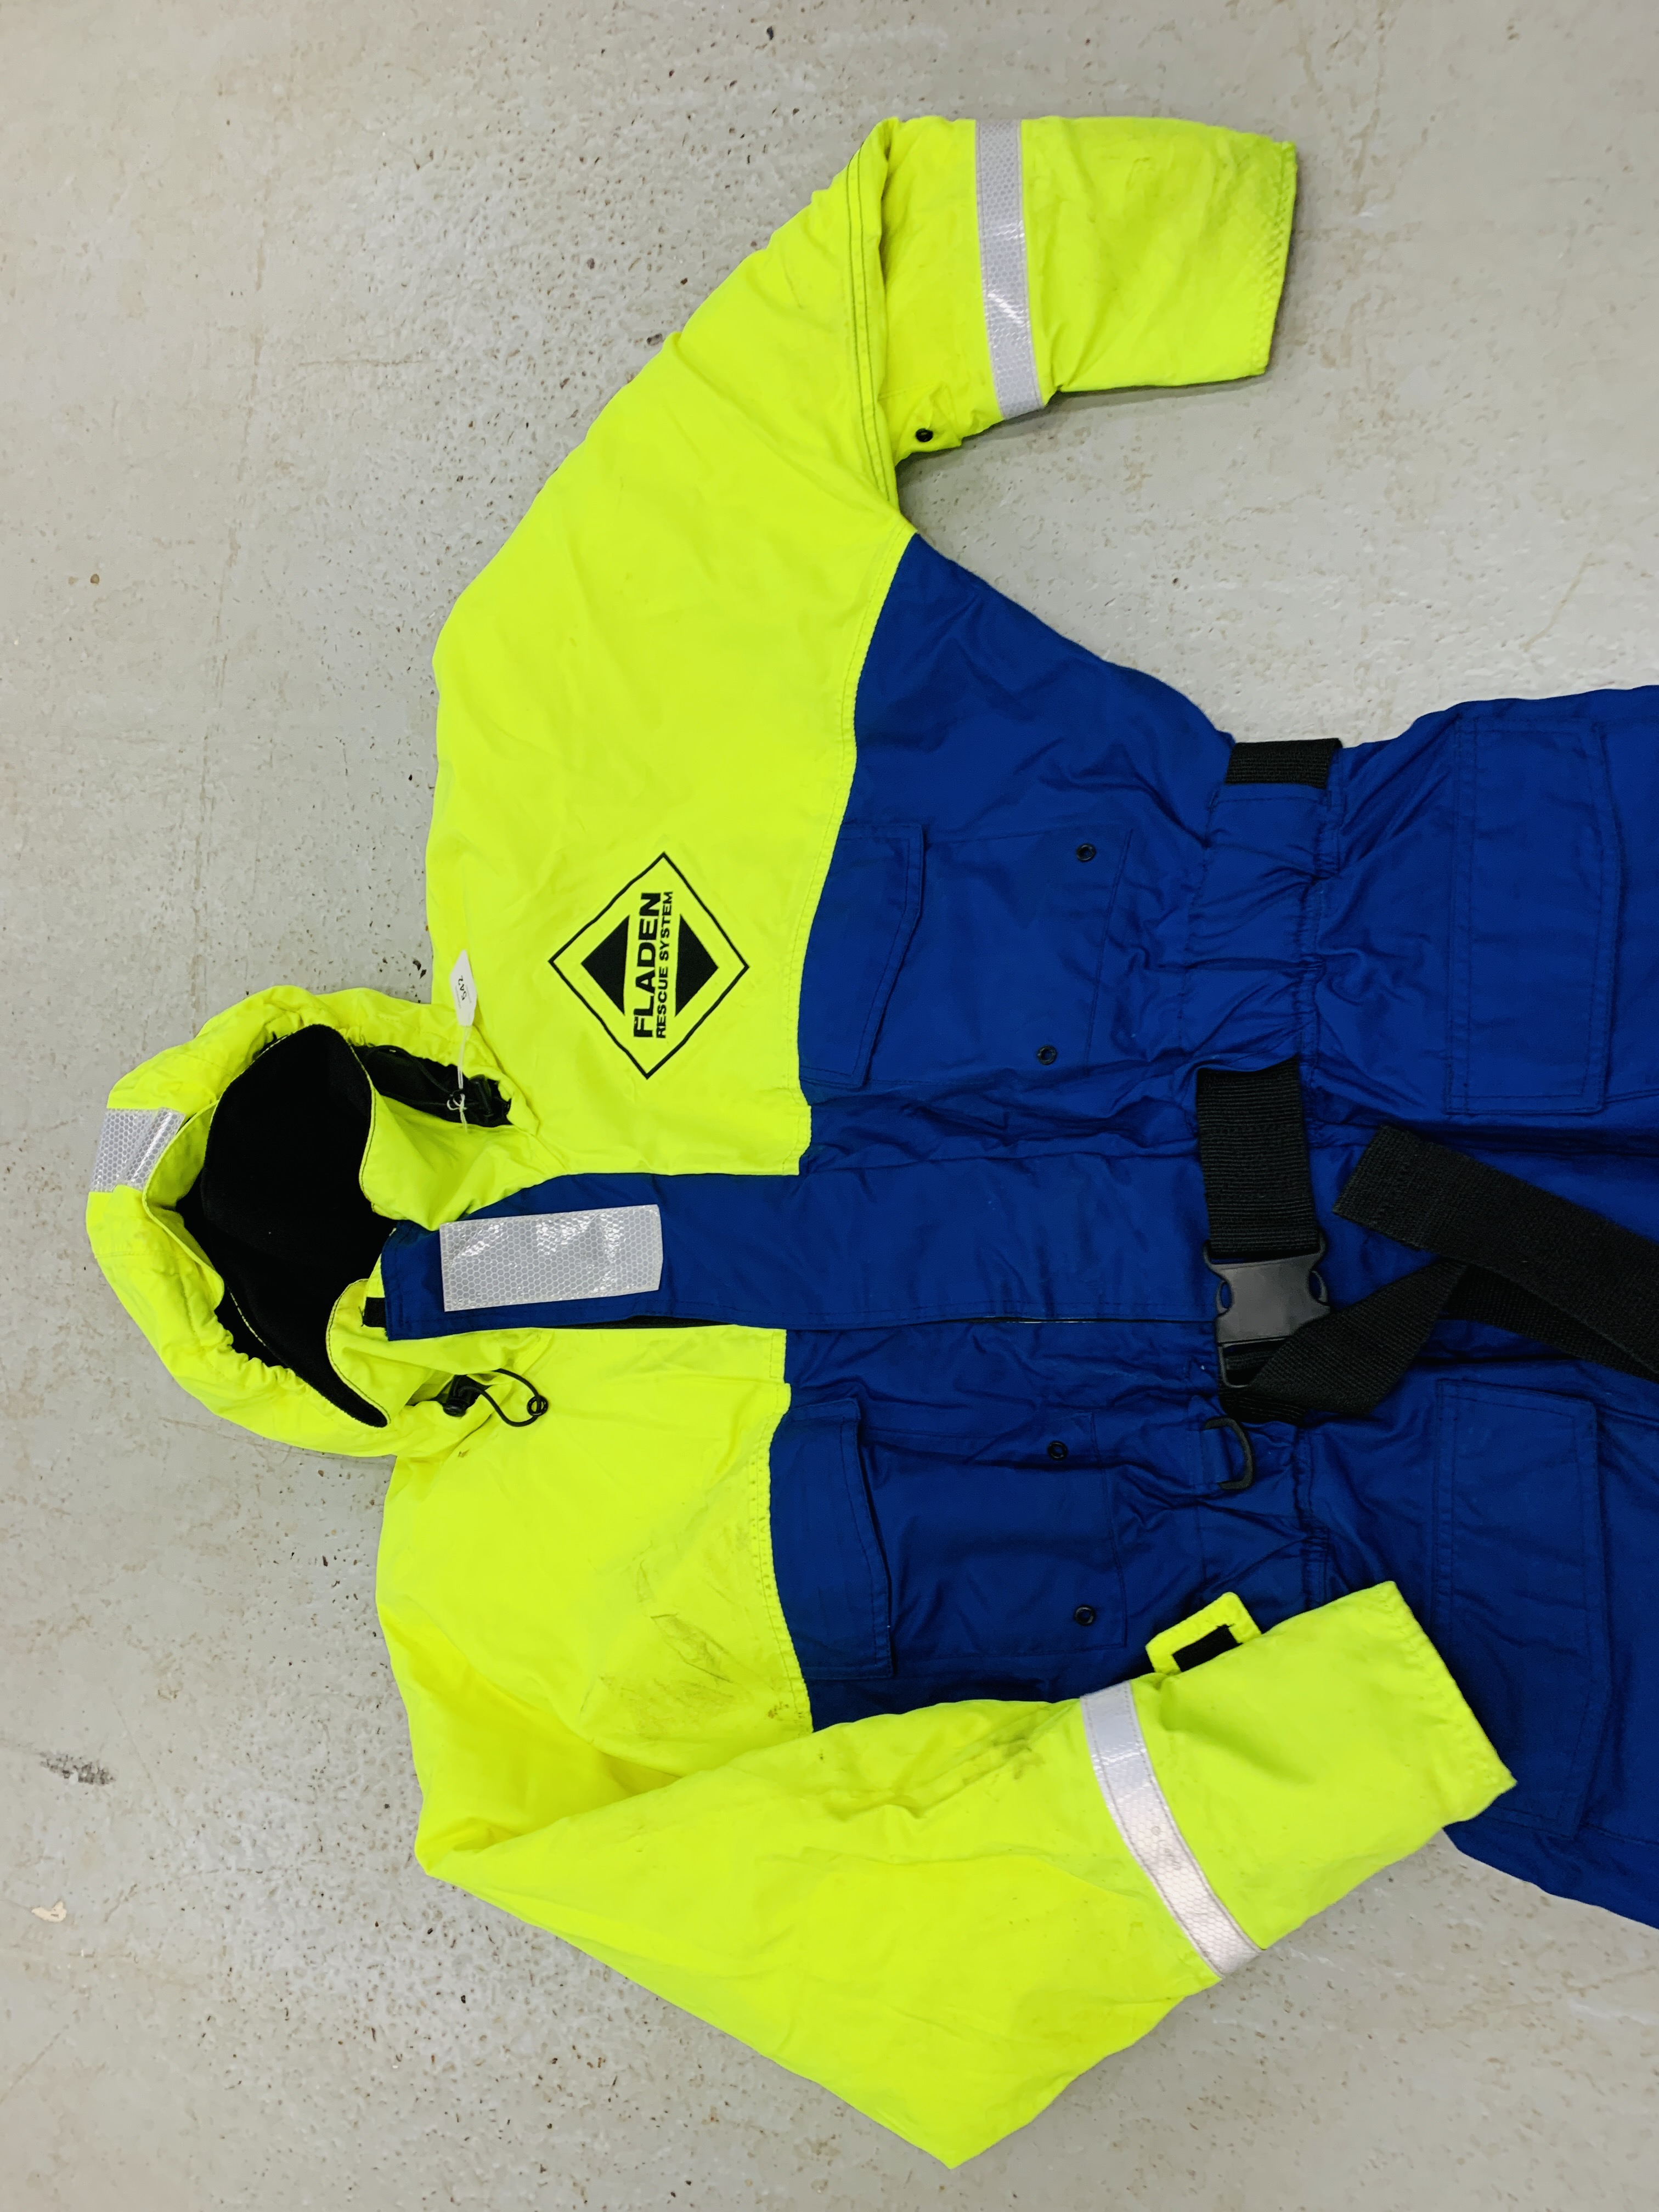 A FLADEN RESCUE SYSTEM FULL BODY SUIT, - Image 3 of 4